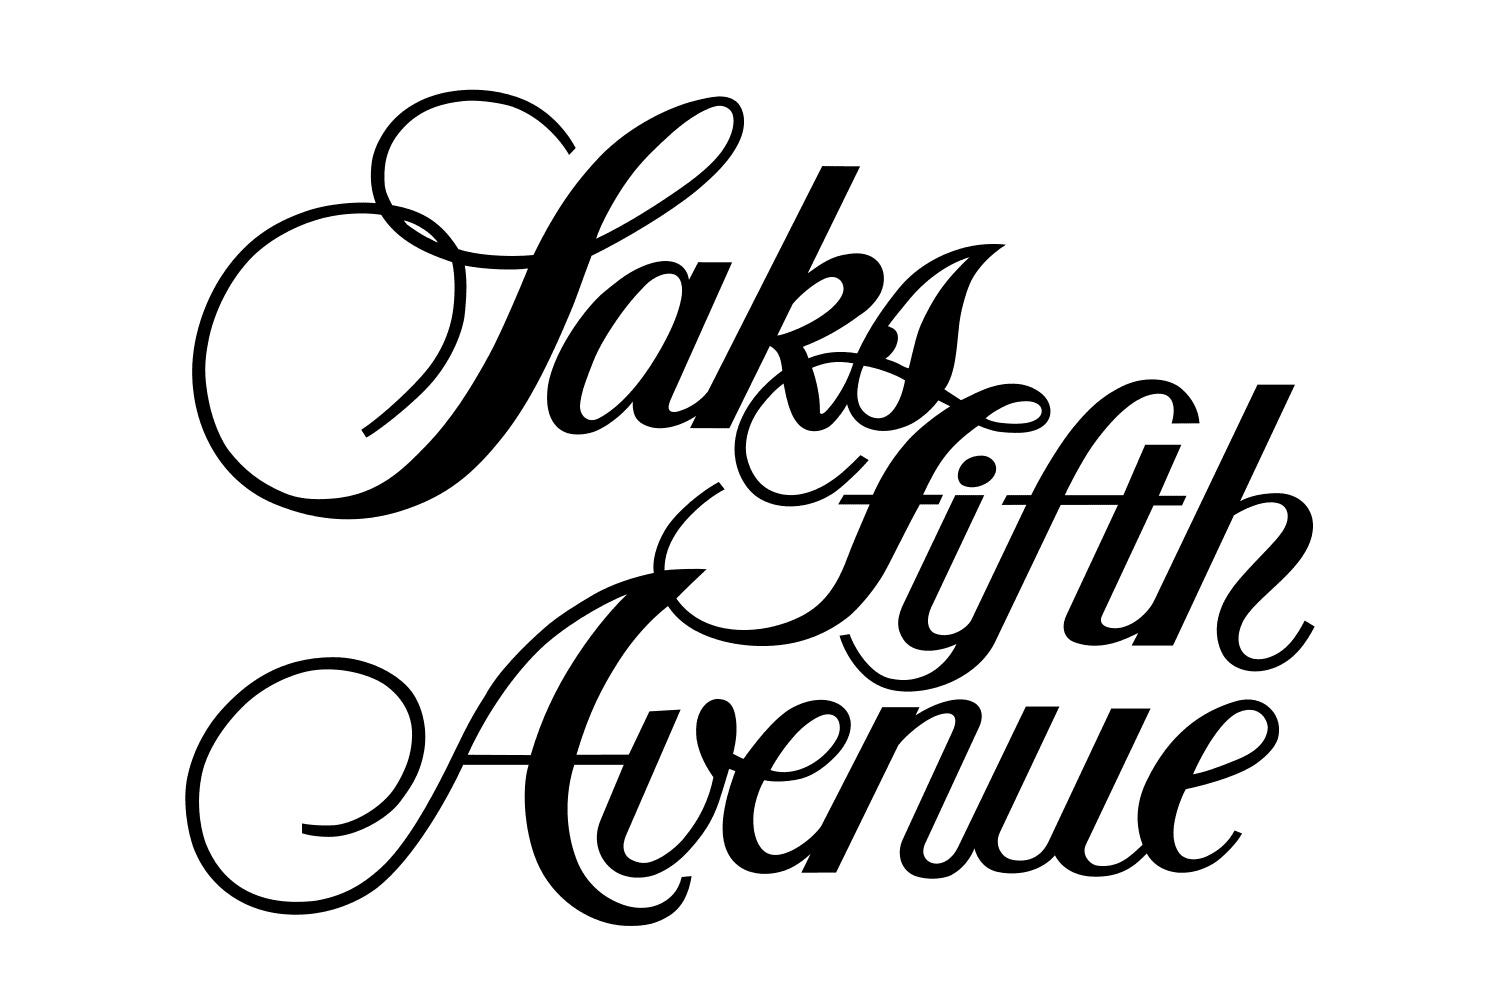 Alterations Associate - Saks Fifth Avenue - (Full time) - Brobston Group